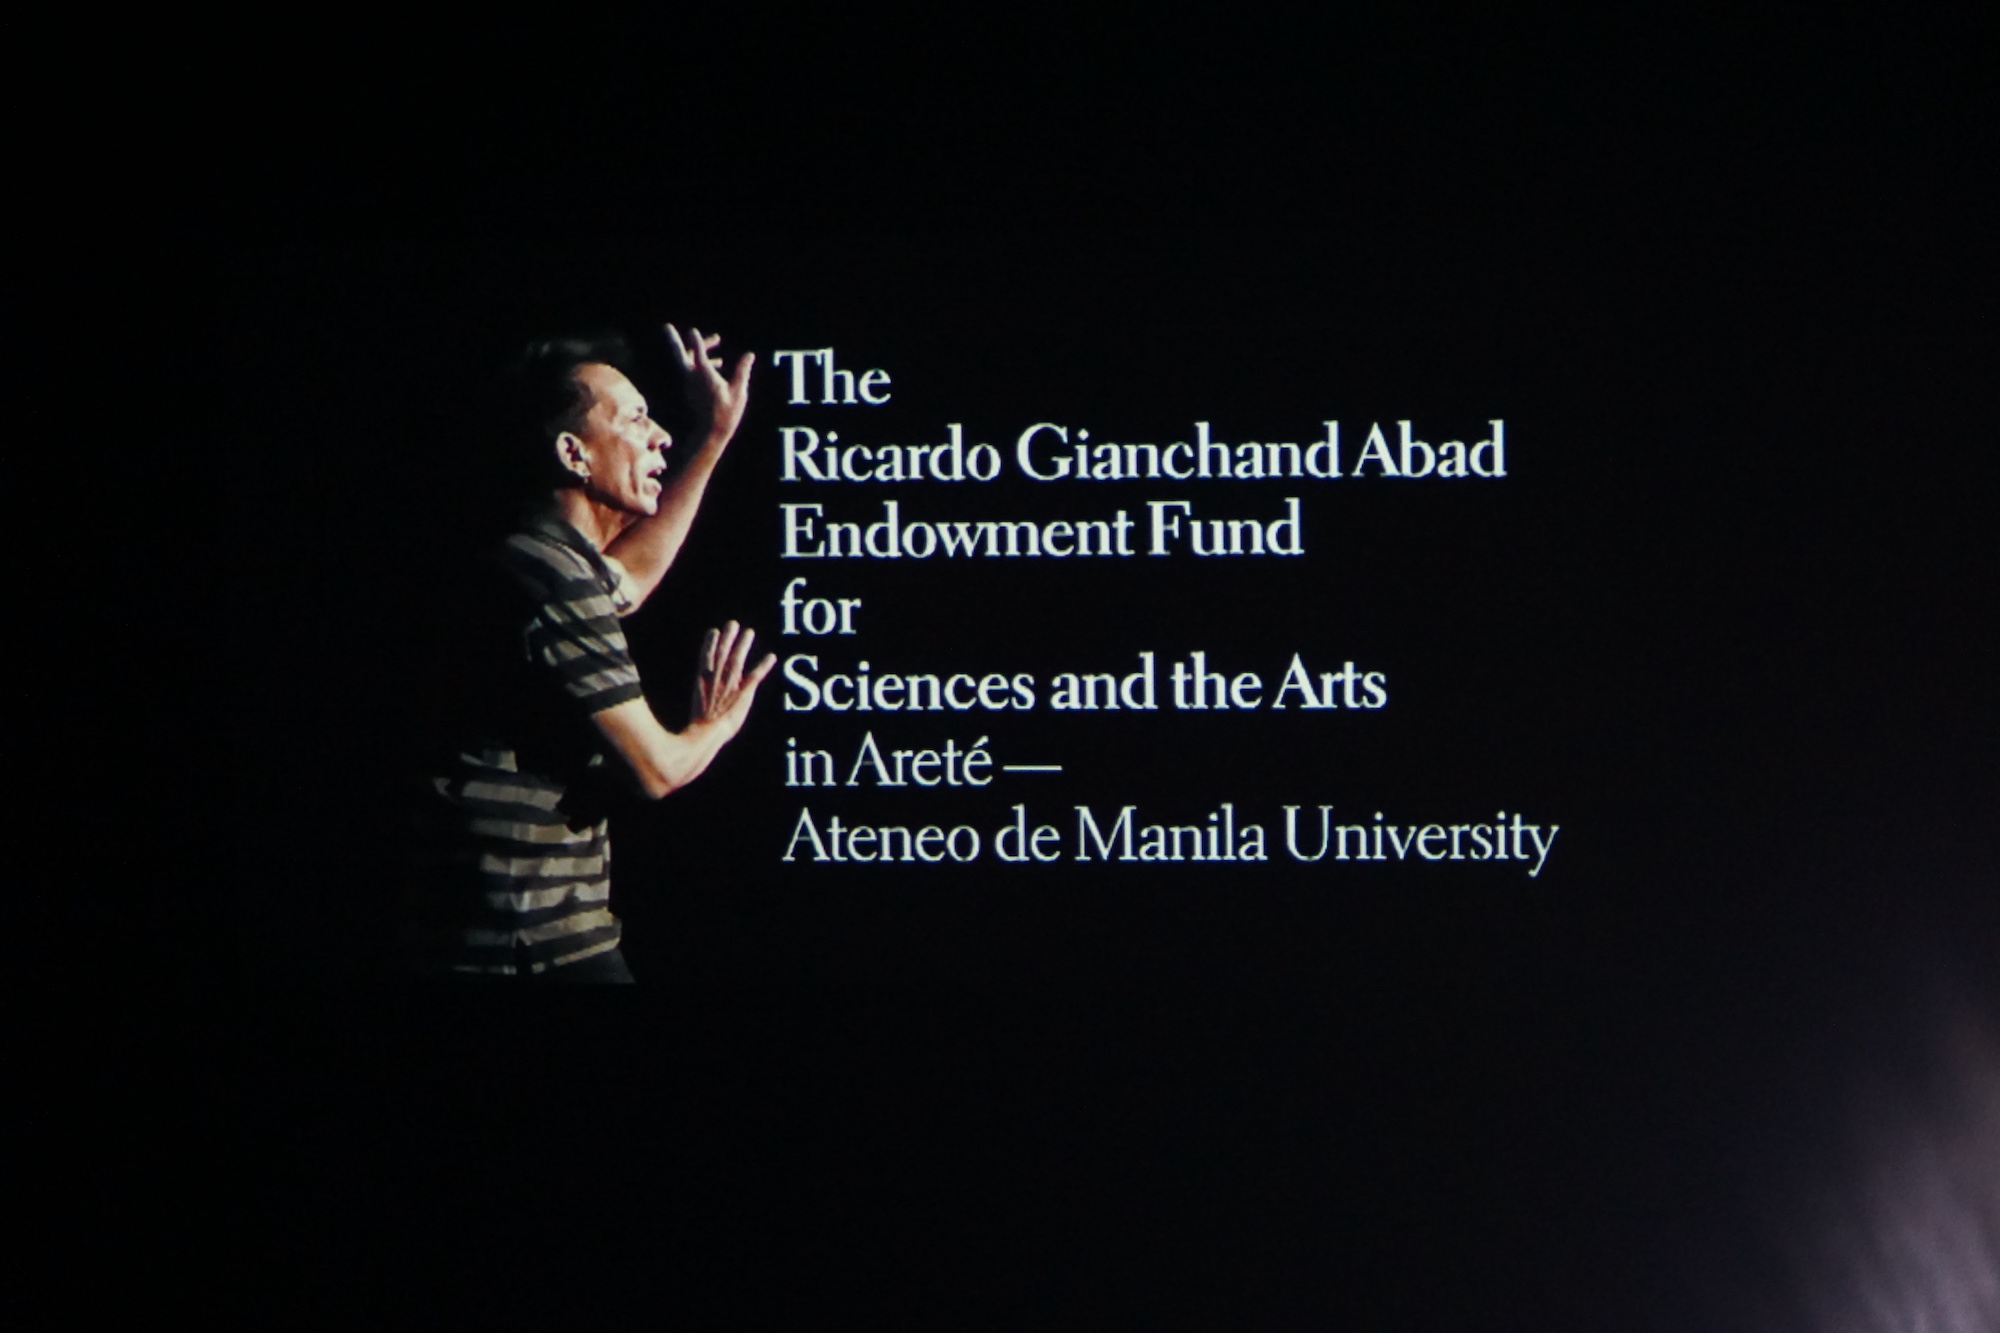 The Ricardo Gianchand Abad Endowment Fund for Sciences and the Arts in Areté - Ateneo de Manila University